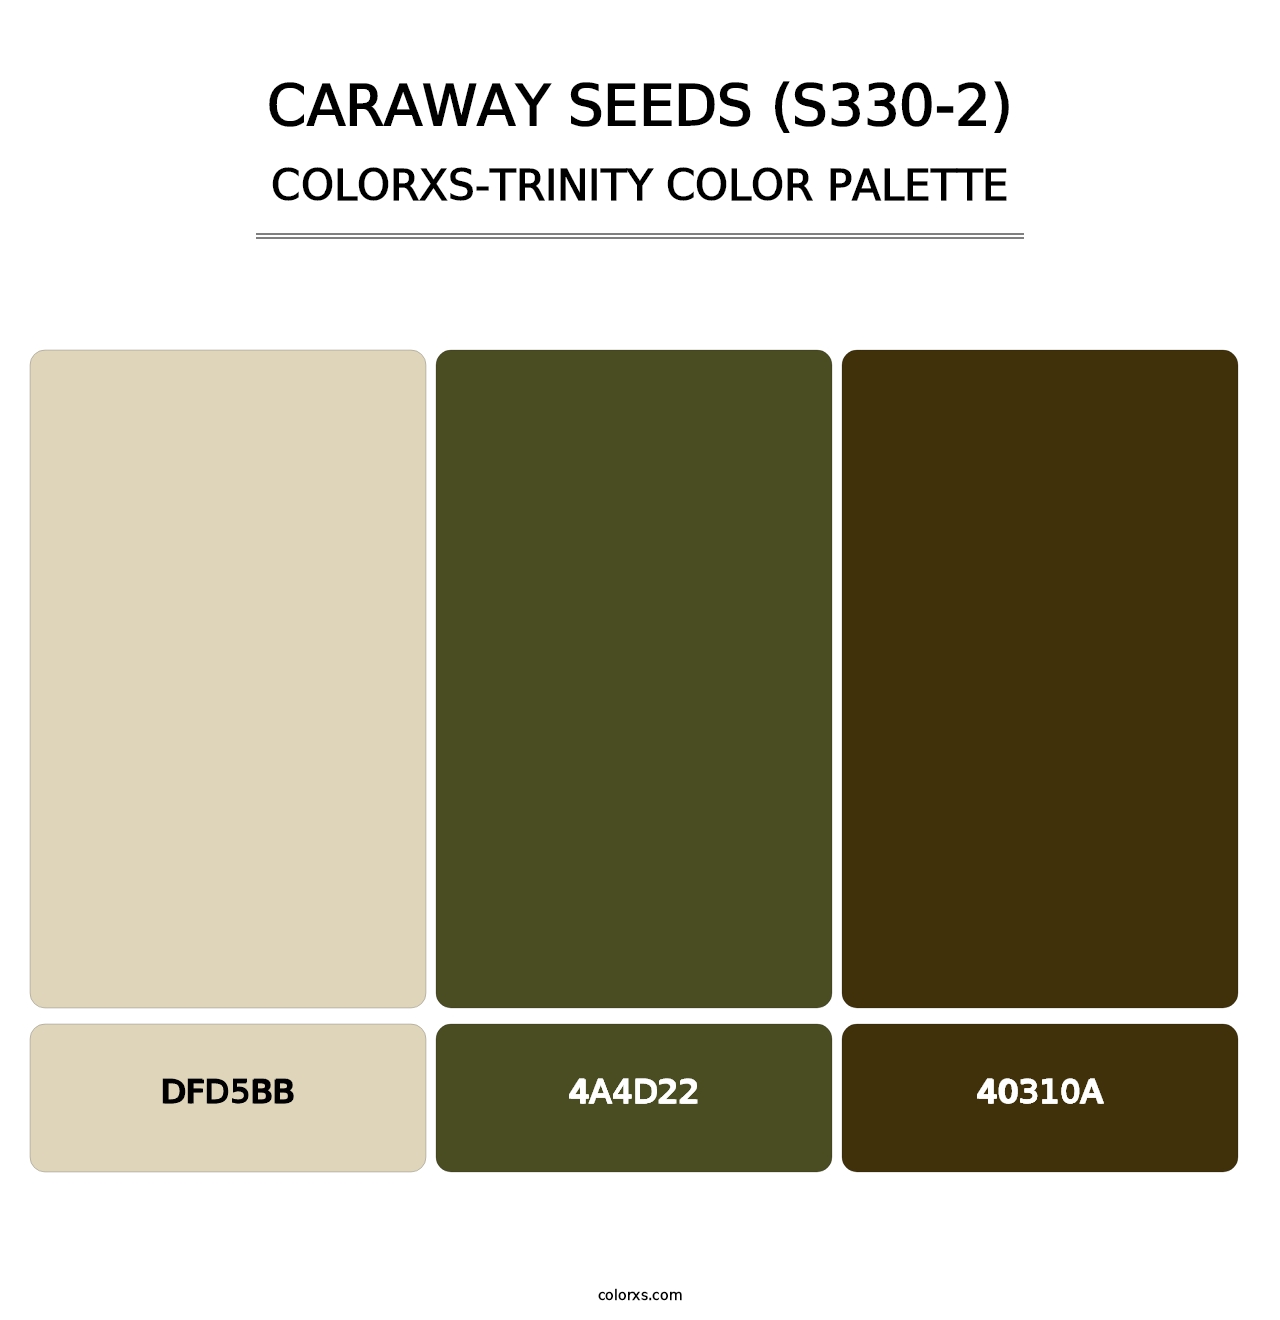 Caraway Seeds (S330-2) - Colorxs Trinity Palette